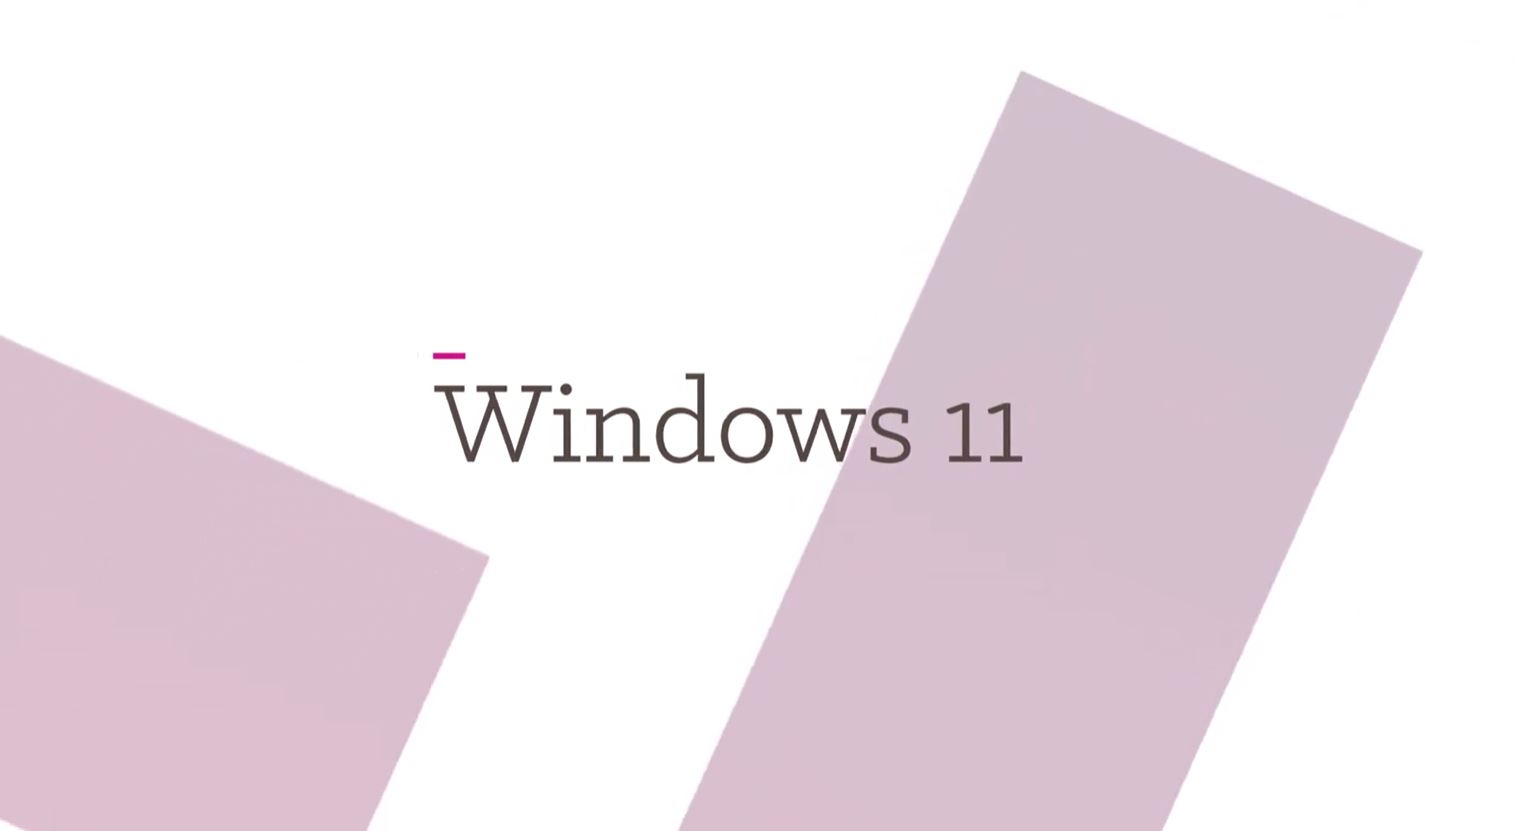 Article Introducing Windows 11 Image